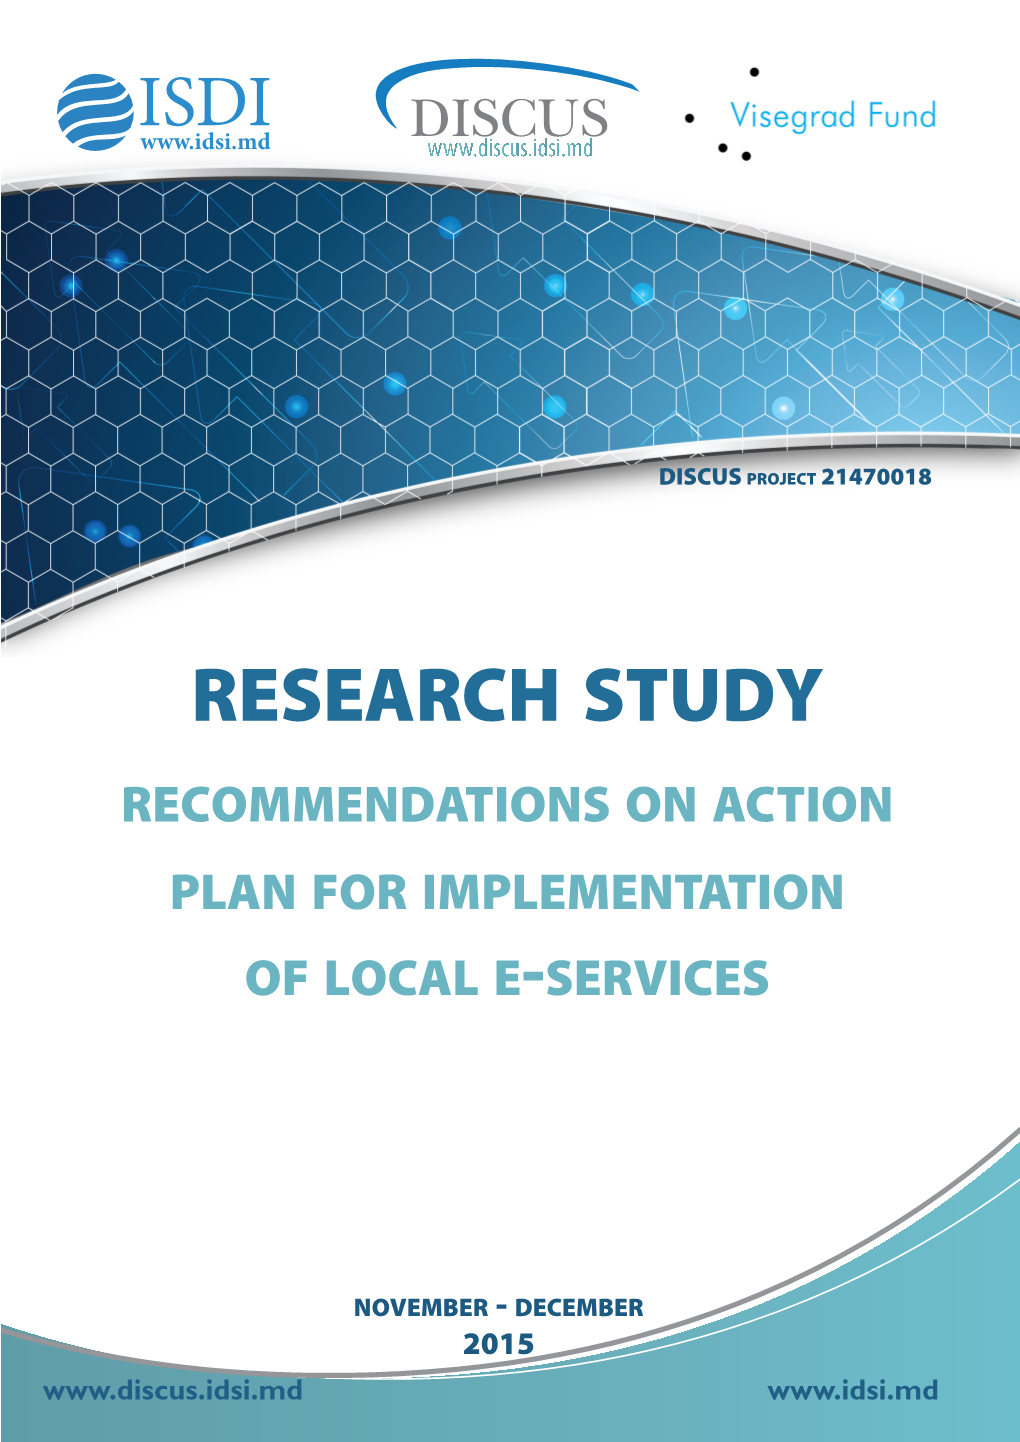 Research Study Recommendations on Action Plan for Implementation of Local E-Services